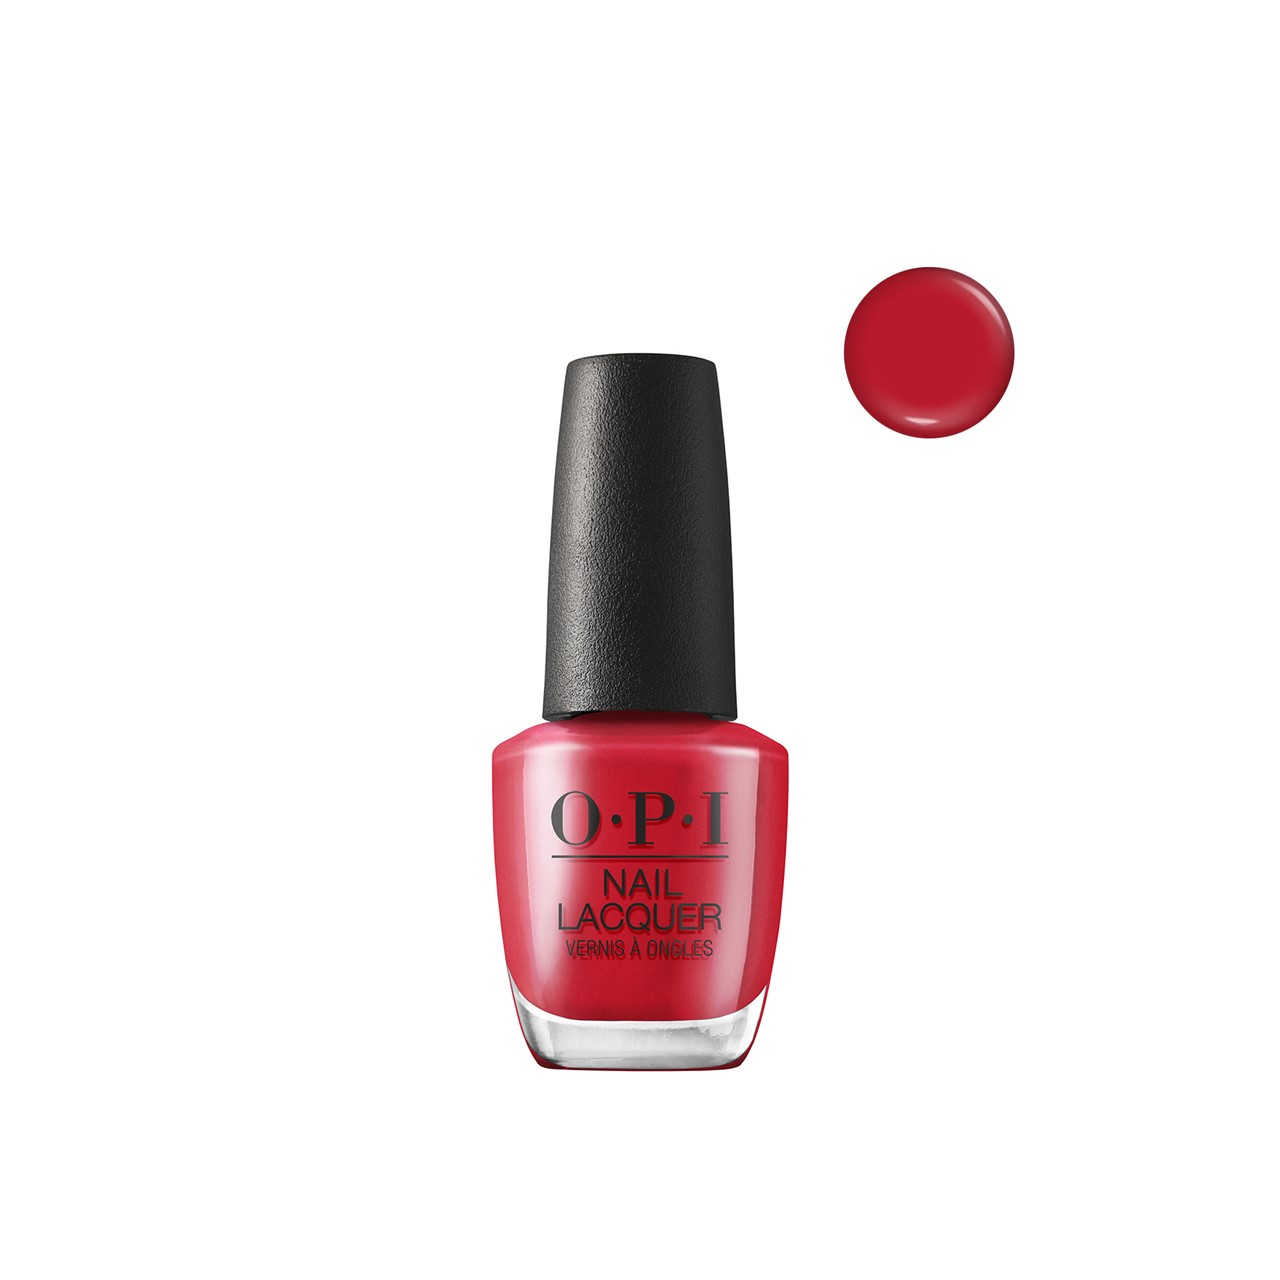 OPI Nail Lacquer Emmy, Have You Seen Oscar? 15ml (0.51fl oz)